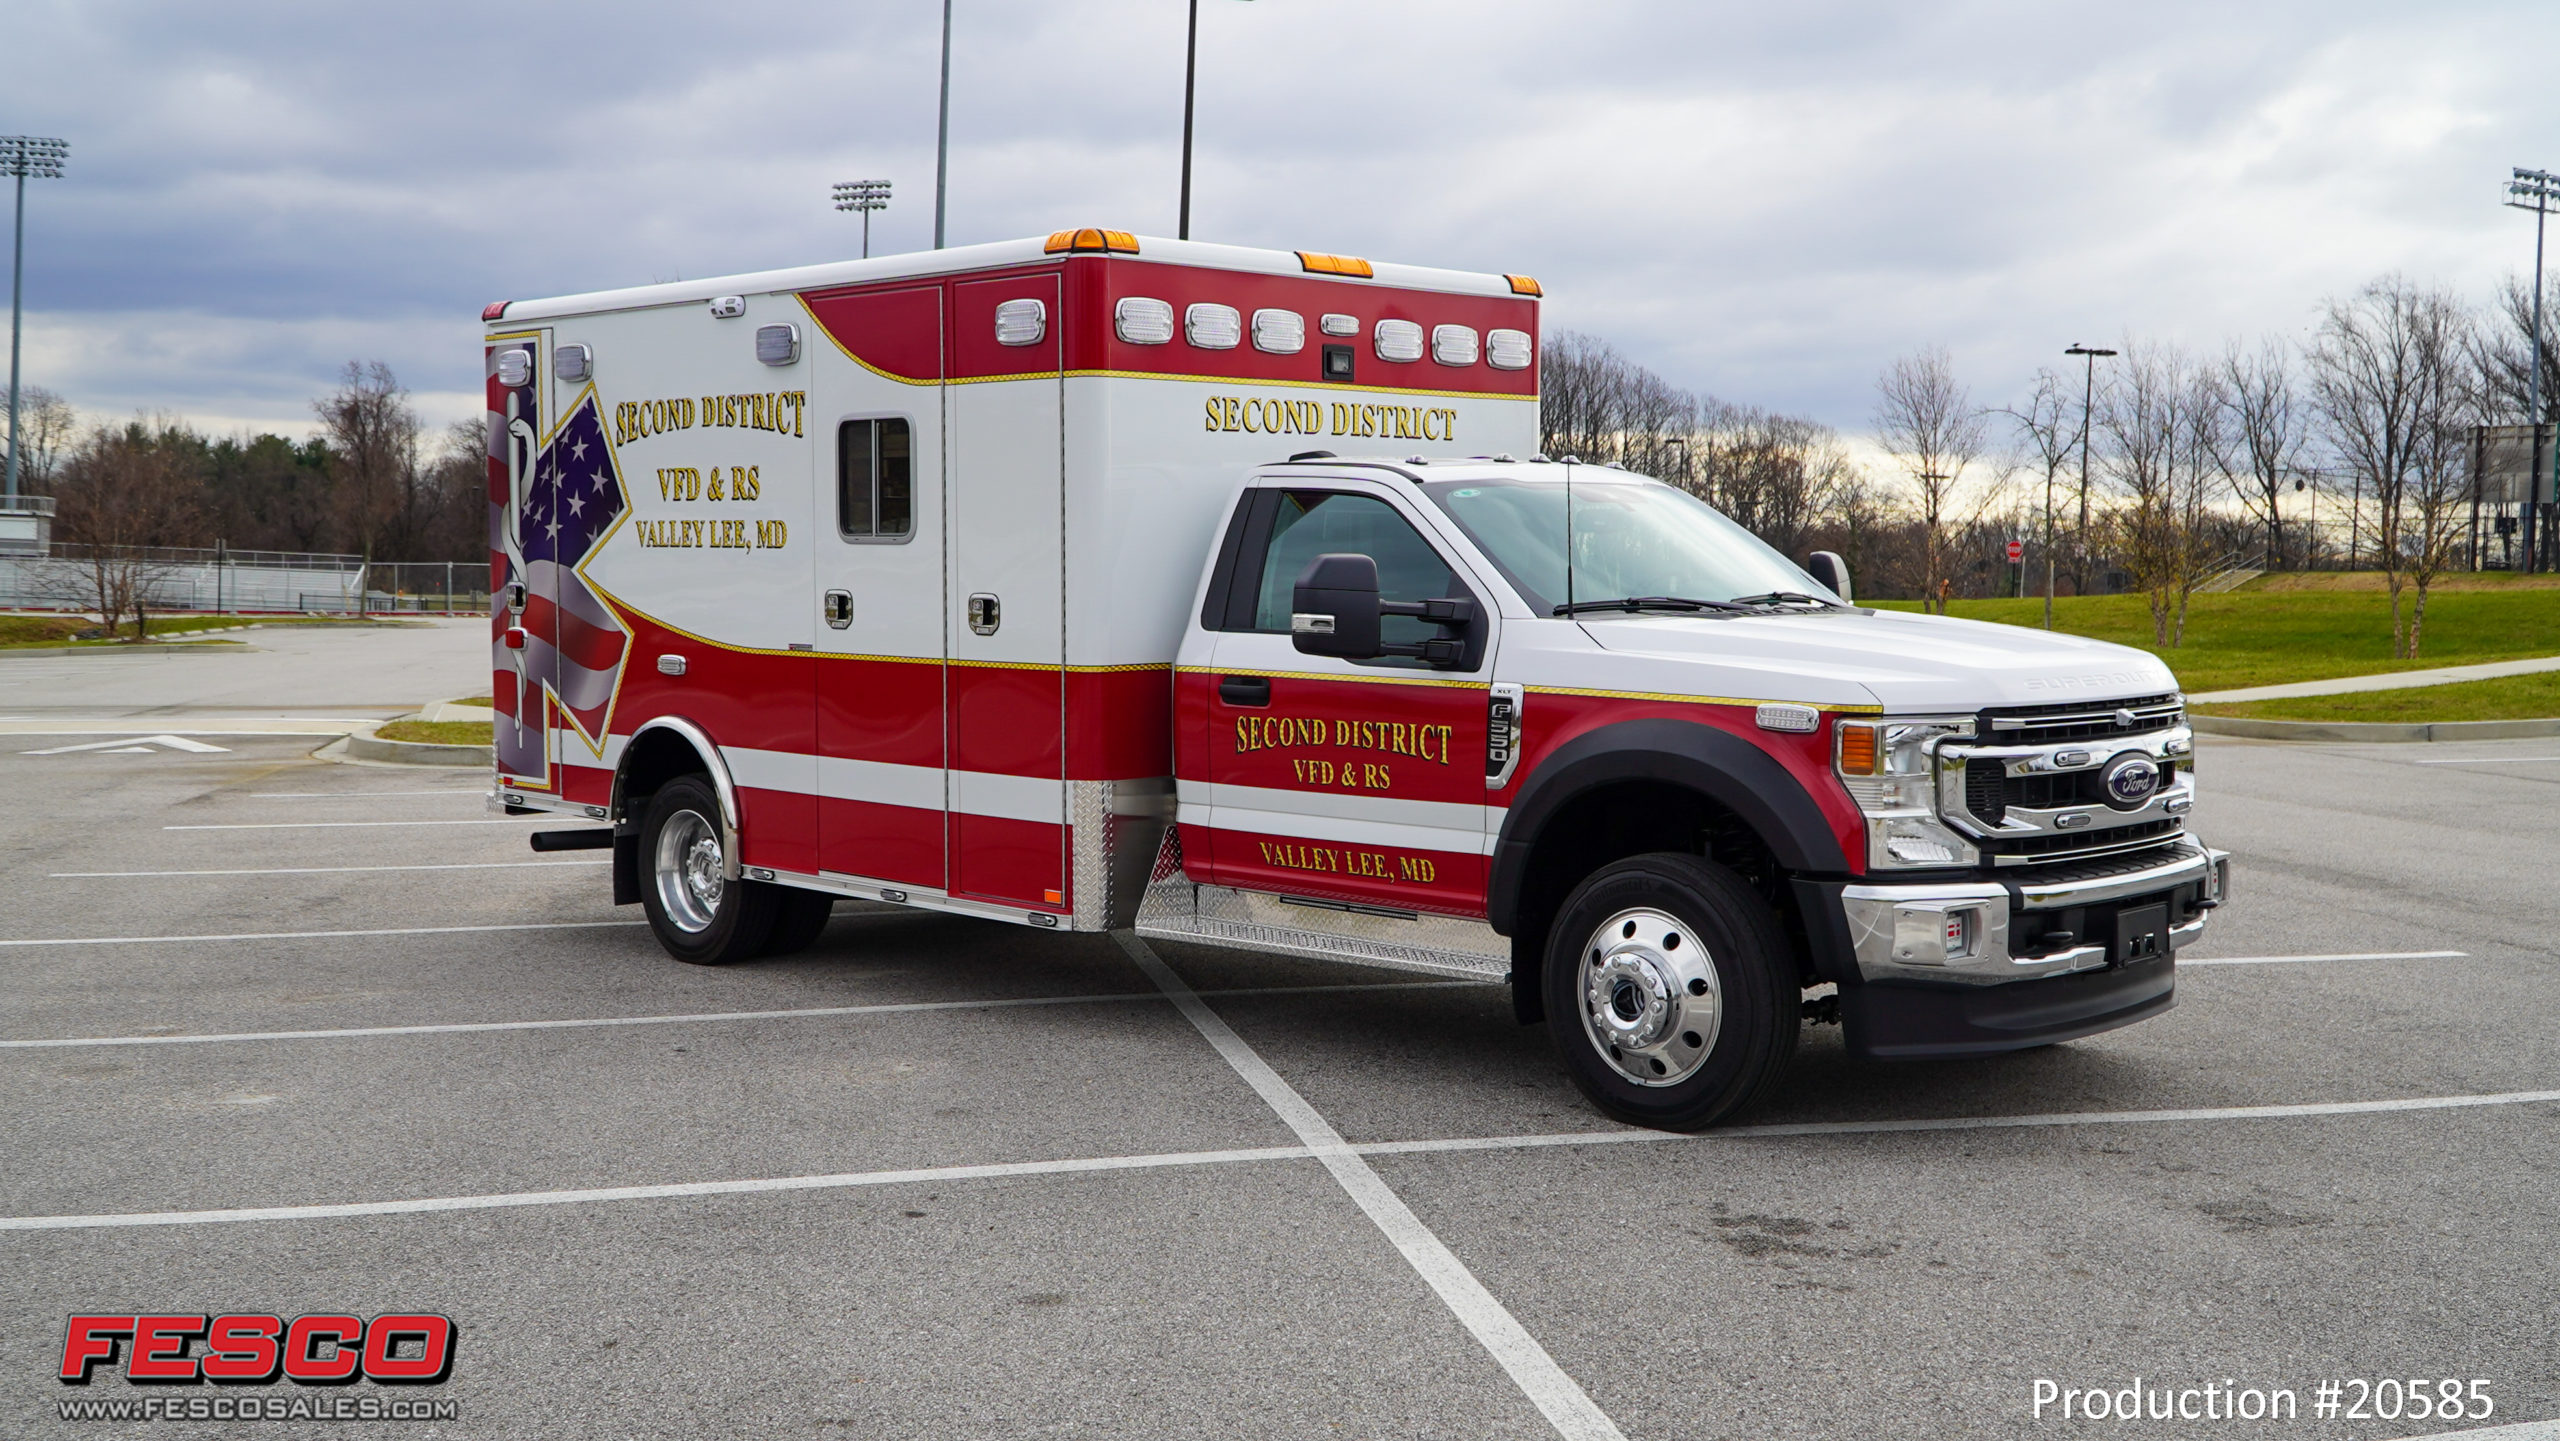 Second-District-20585-14-scaled Horton Emergency Vehicle